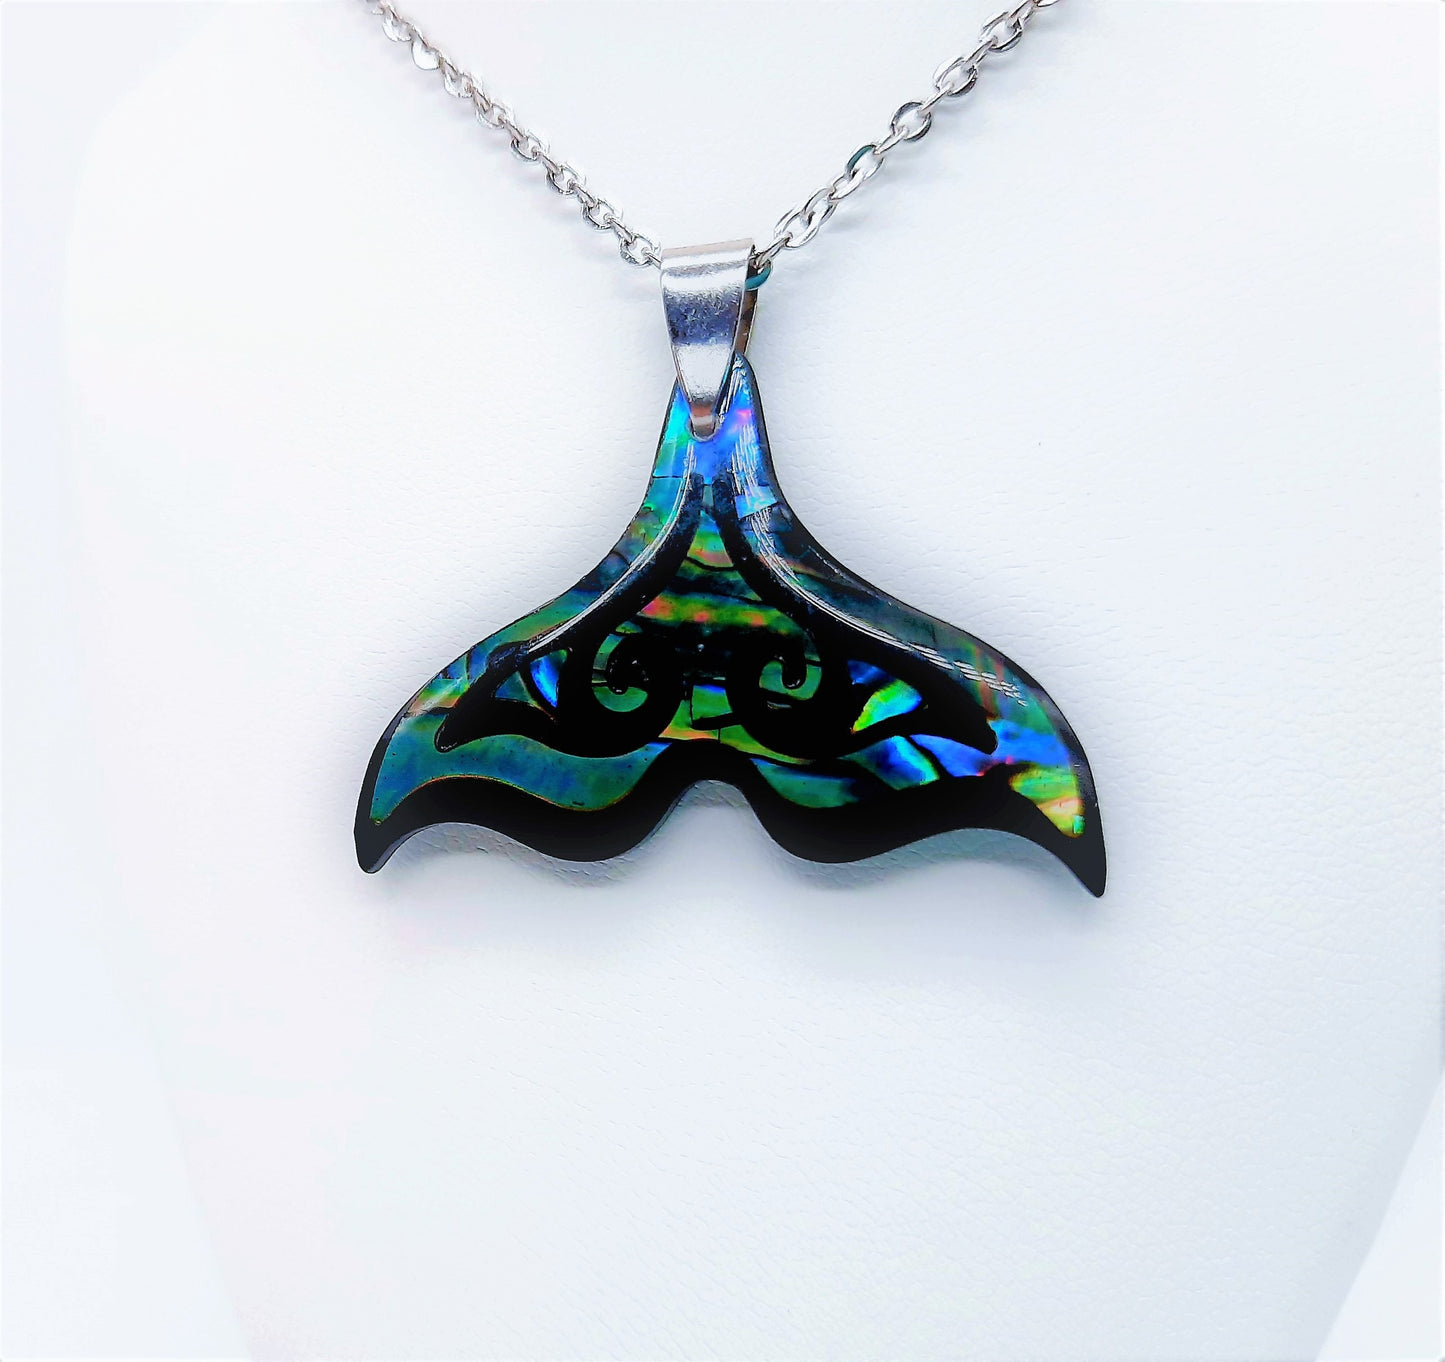 Abalone / Paua Seashell Mermaid Tail / Whale Tail Pendant Necklace - Stainless Steel - Hypoallergenic 18" Chain - Lobster Claw Closure